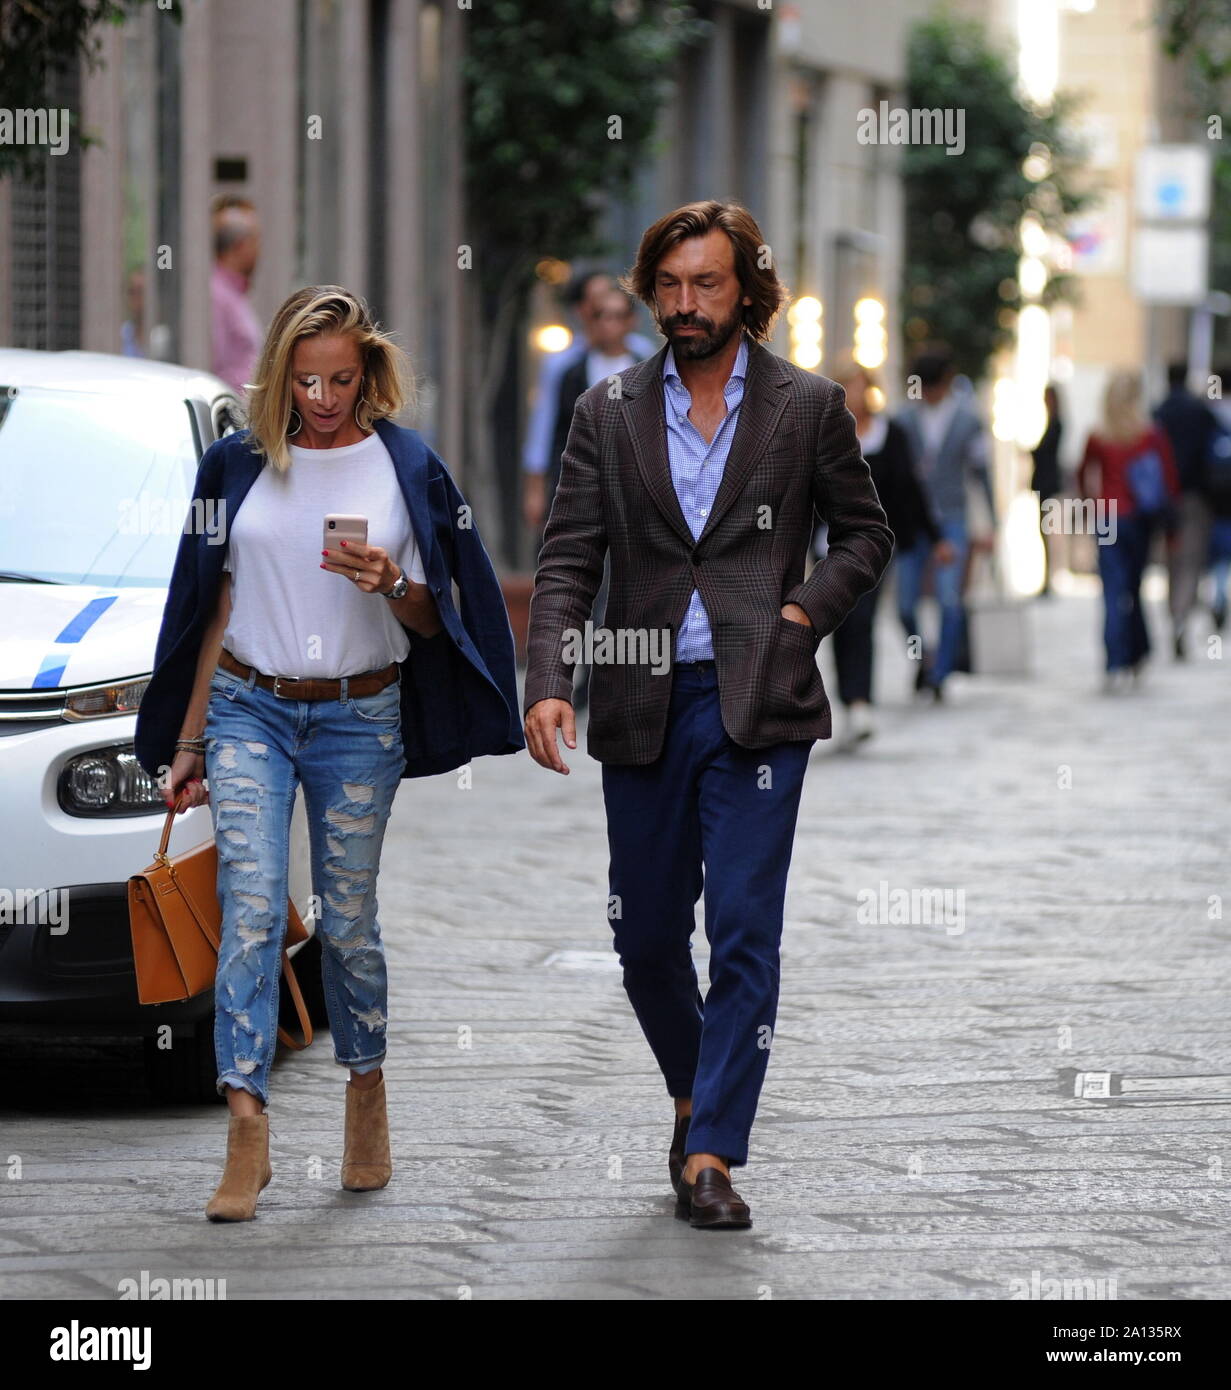 Valentina Baldini And Andrea Pirlo High Resolution Stock Photography And Images Alamy